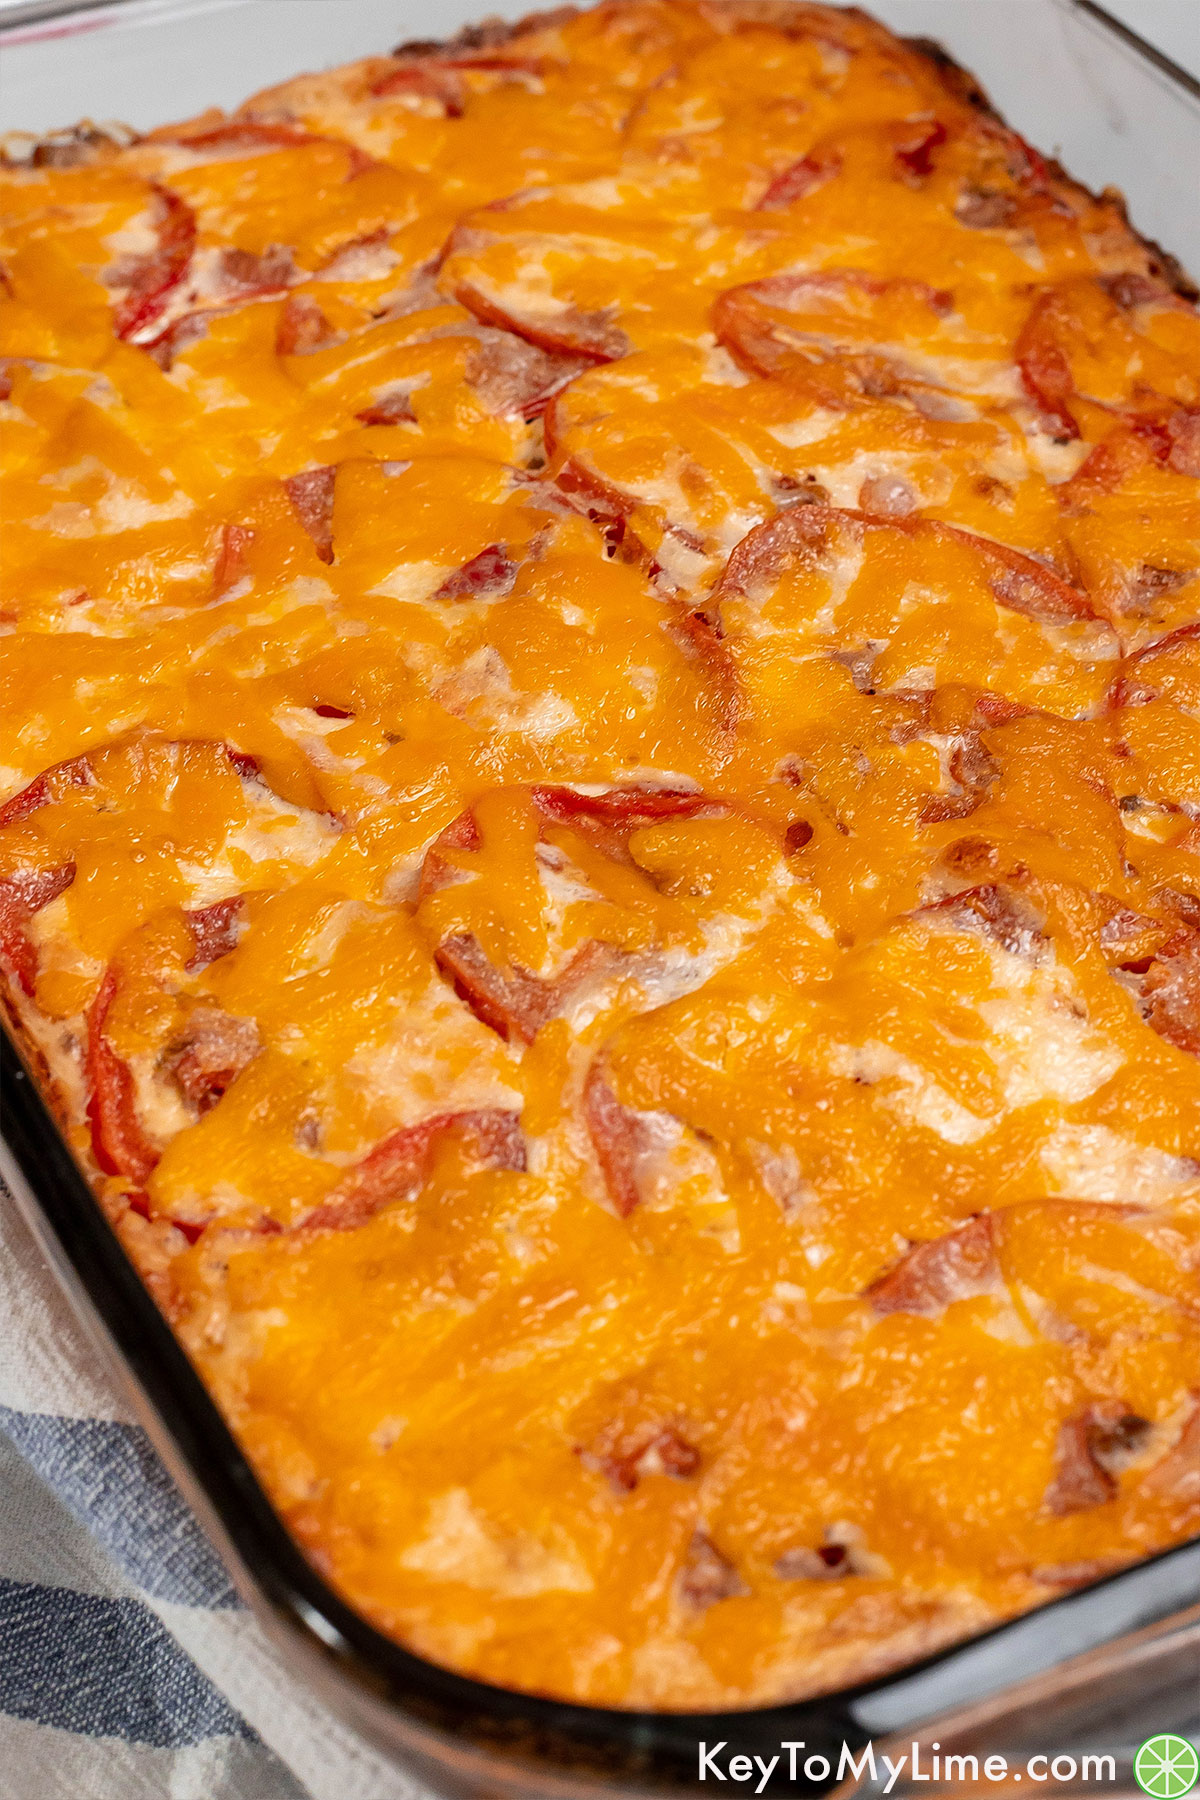 Side shot of a full casserole with gooey melted cheese and a layer of tomatoes.